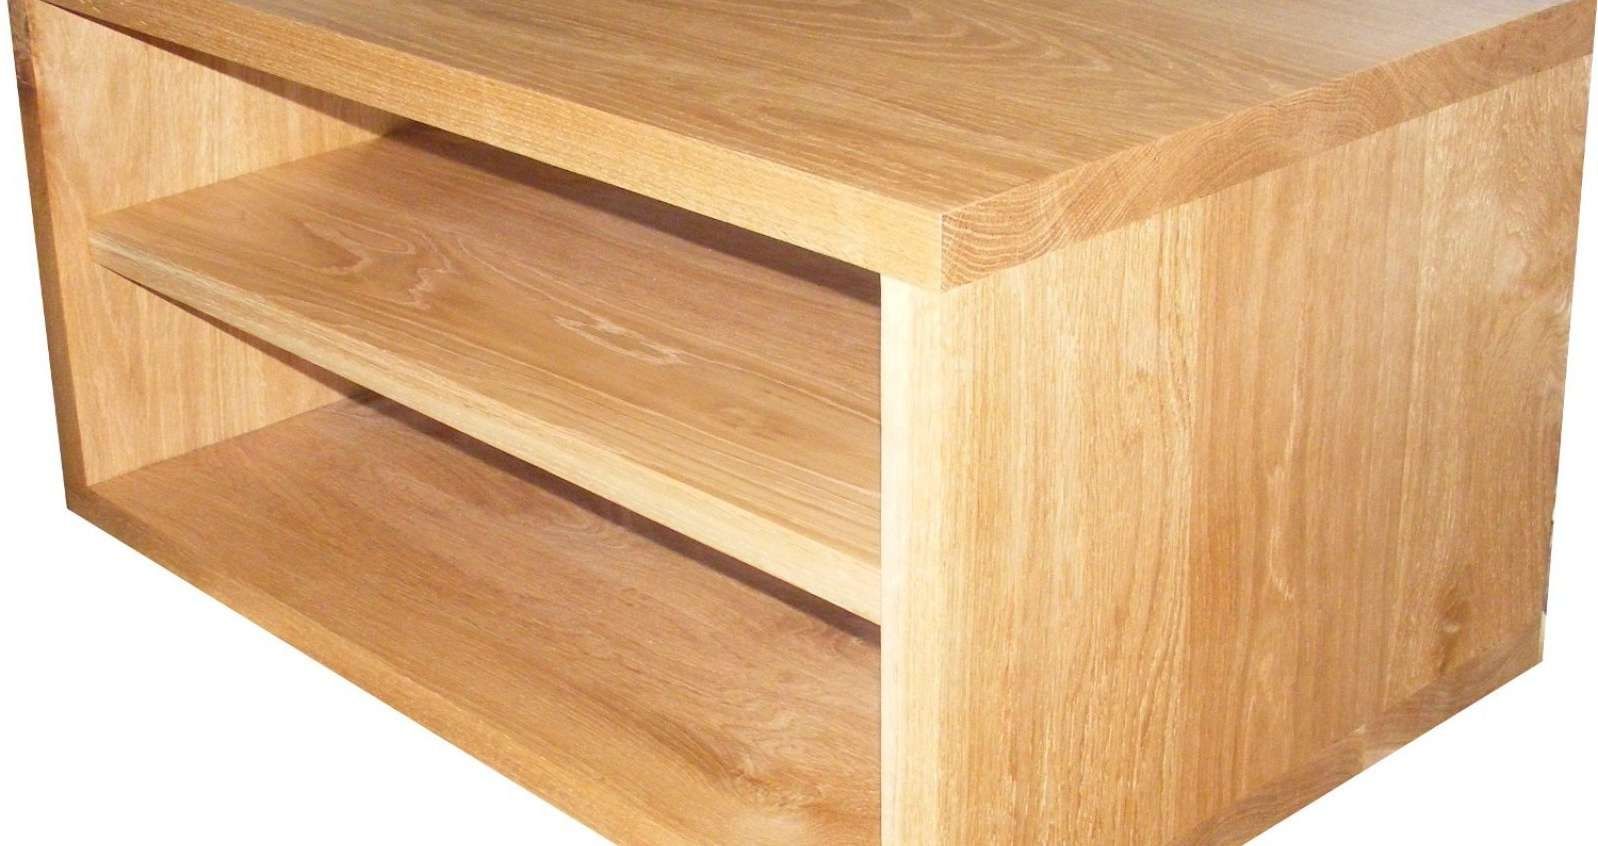 Tv : Wooden Tv Stand Models Wonderful Oak Effect Corner Tv Stands Intended For Oak Effect Corner Tv Stands (View 13 of 15)